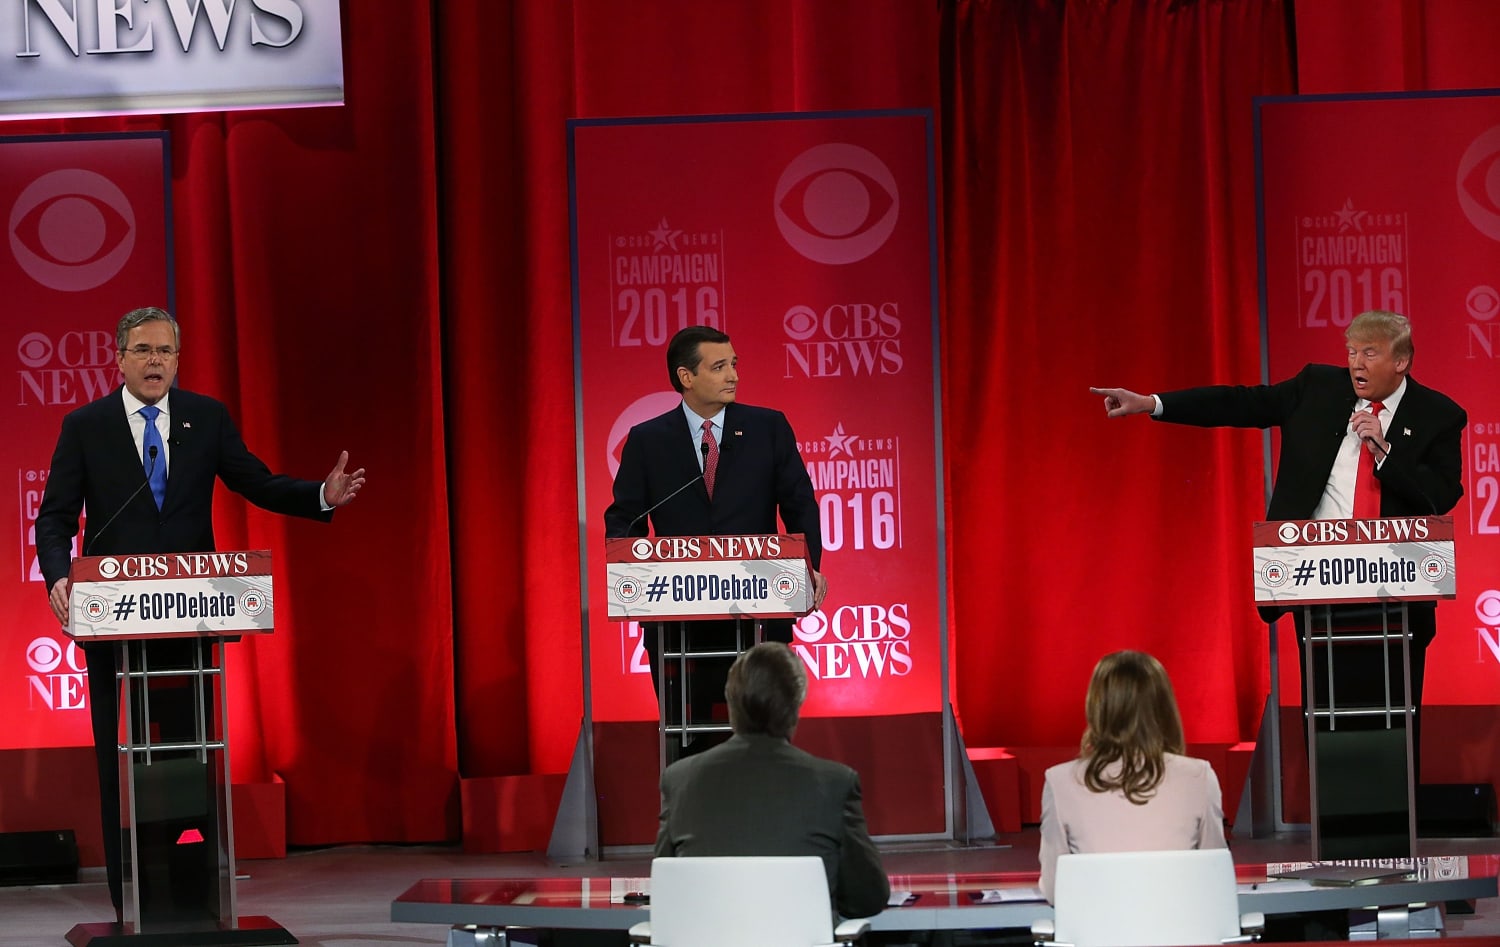 The Republican debate: meet the 2016 candidates, US elections 2016